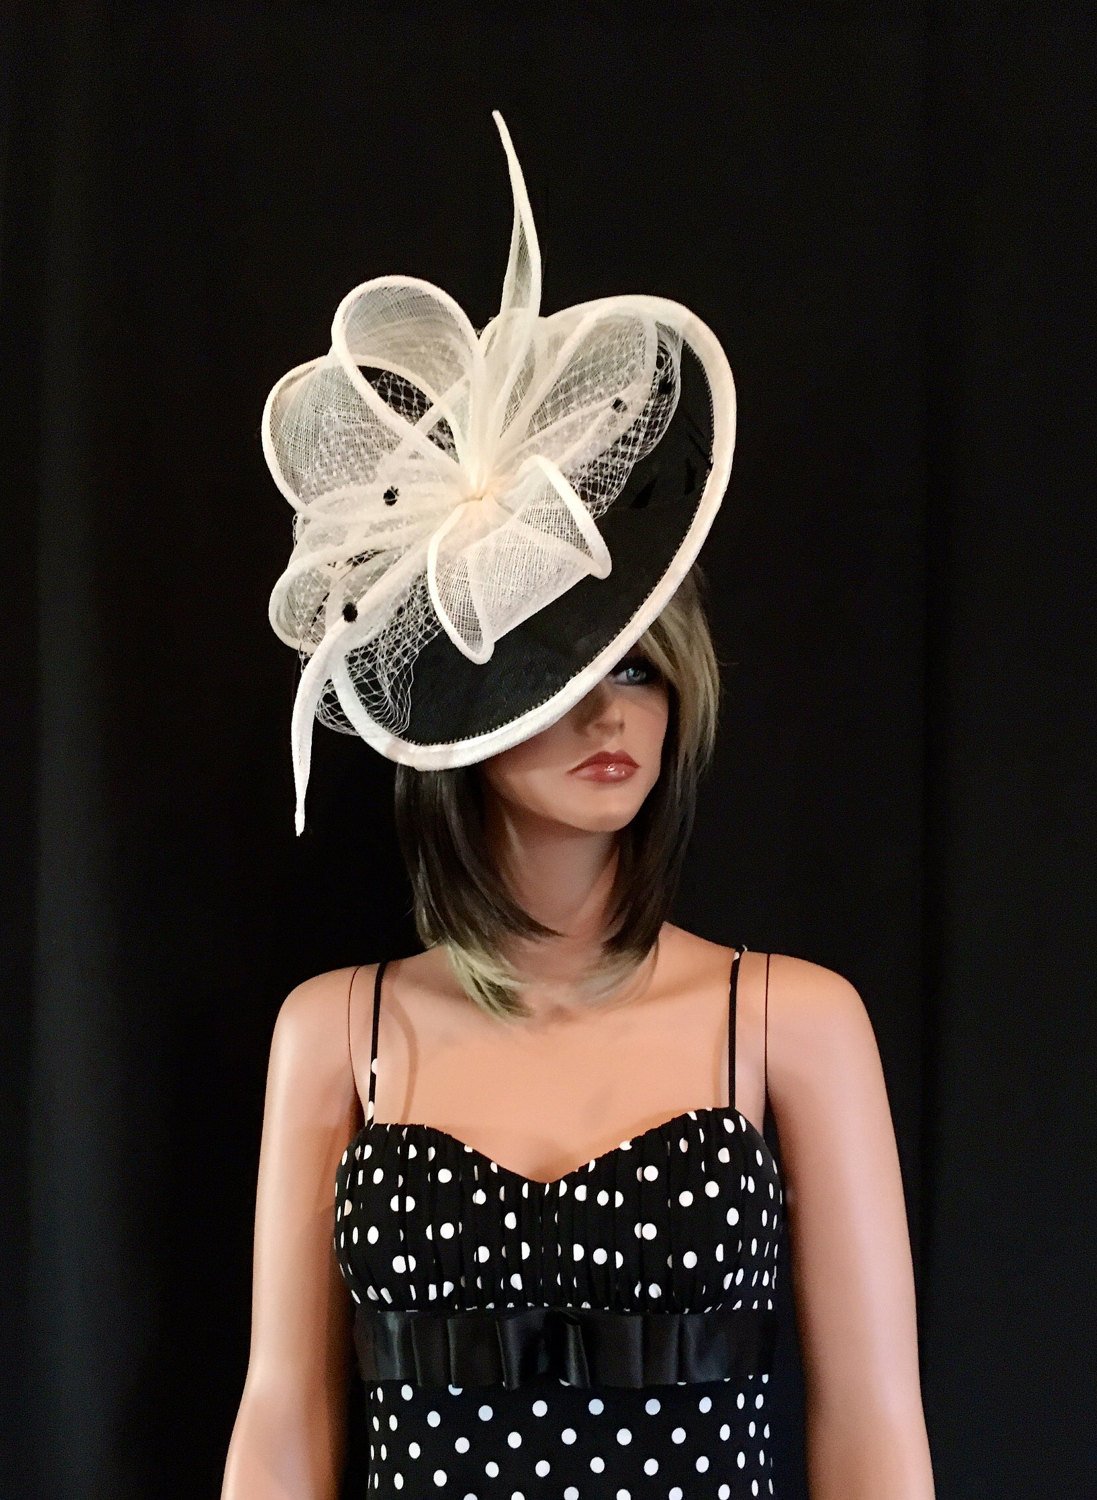 2017 collection.Black and white  fascinator. Kentucky Derby hat. Royal Ascot ivory fascinator. Fascinator for church, wedding, races